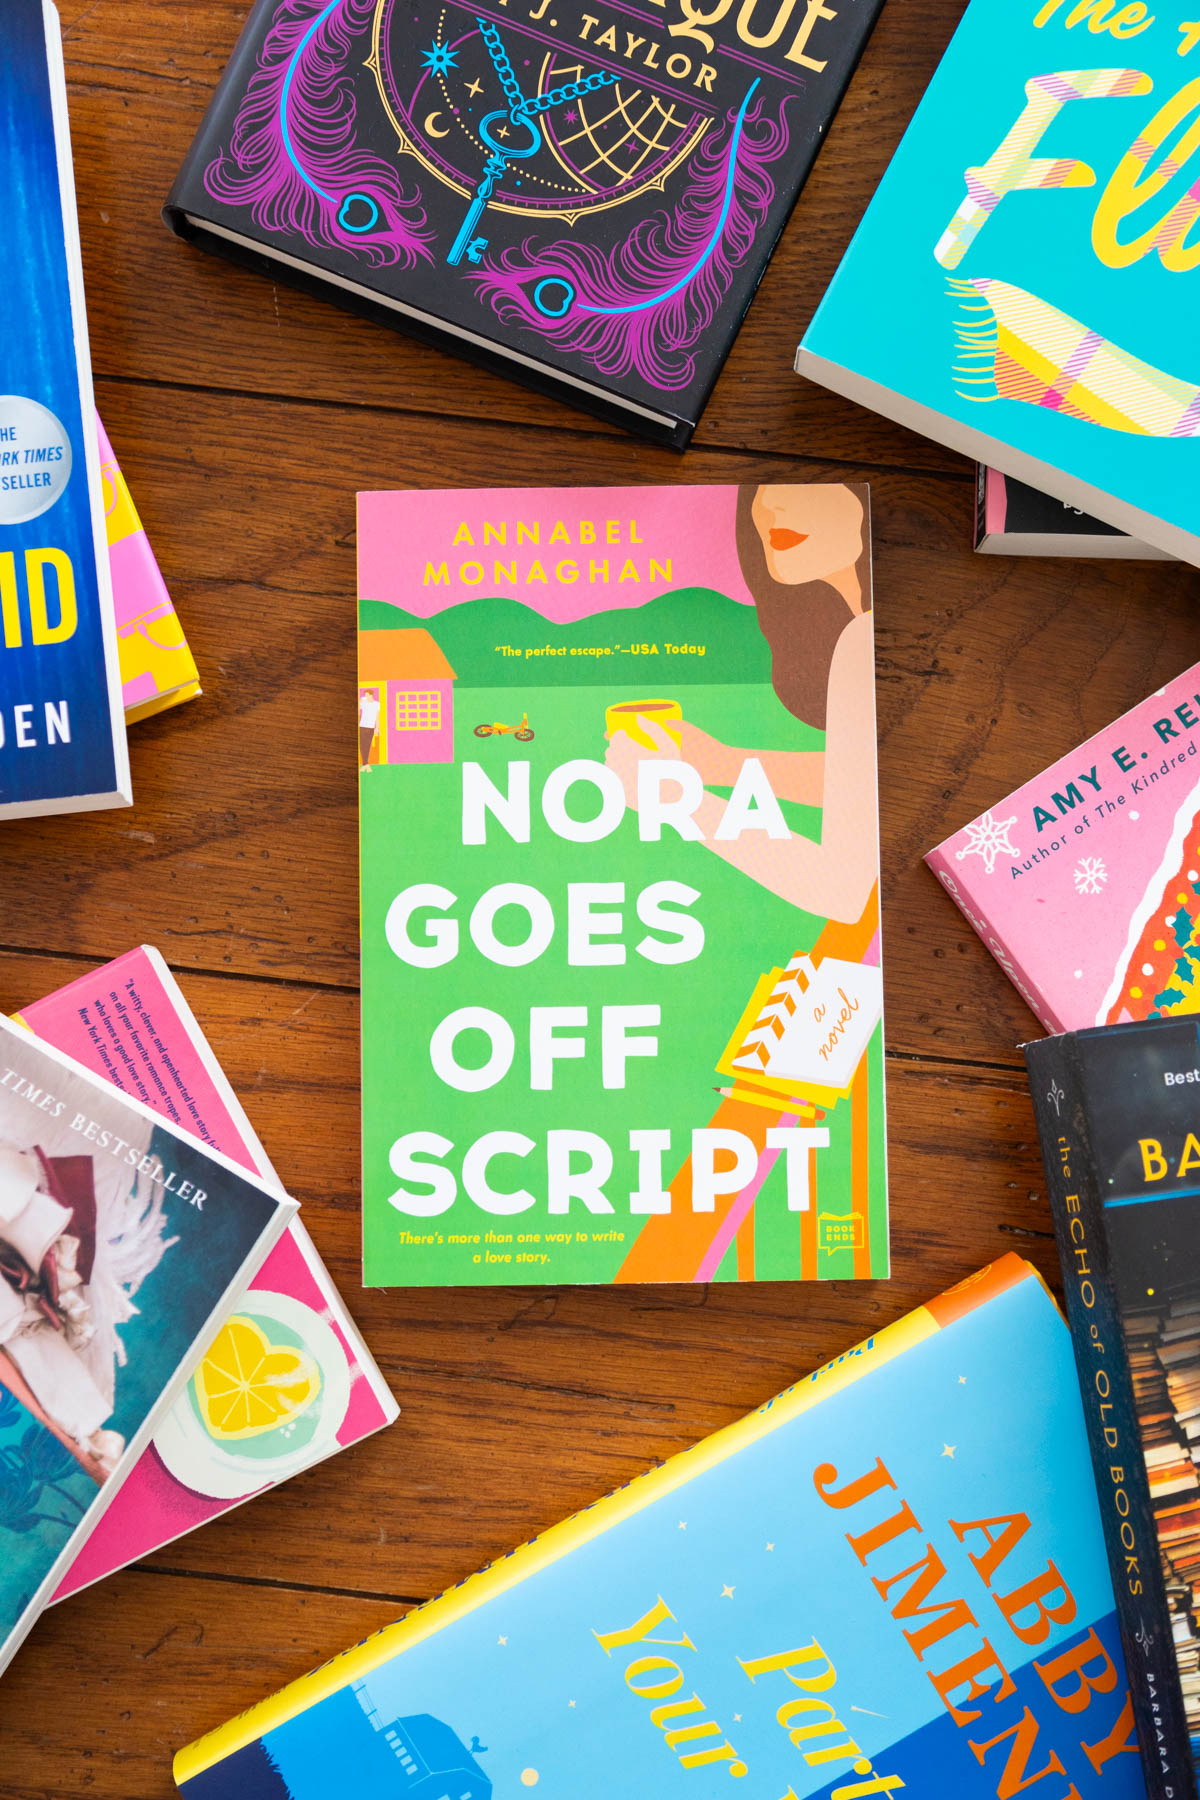 A copy of the book Nora Goes Off Script is on the table.